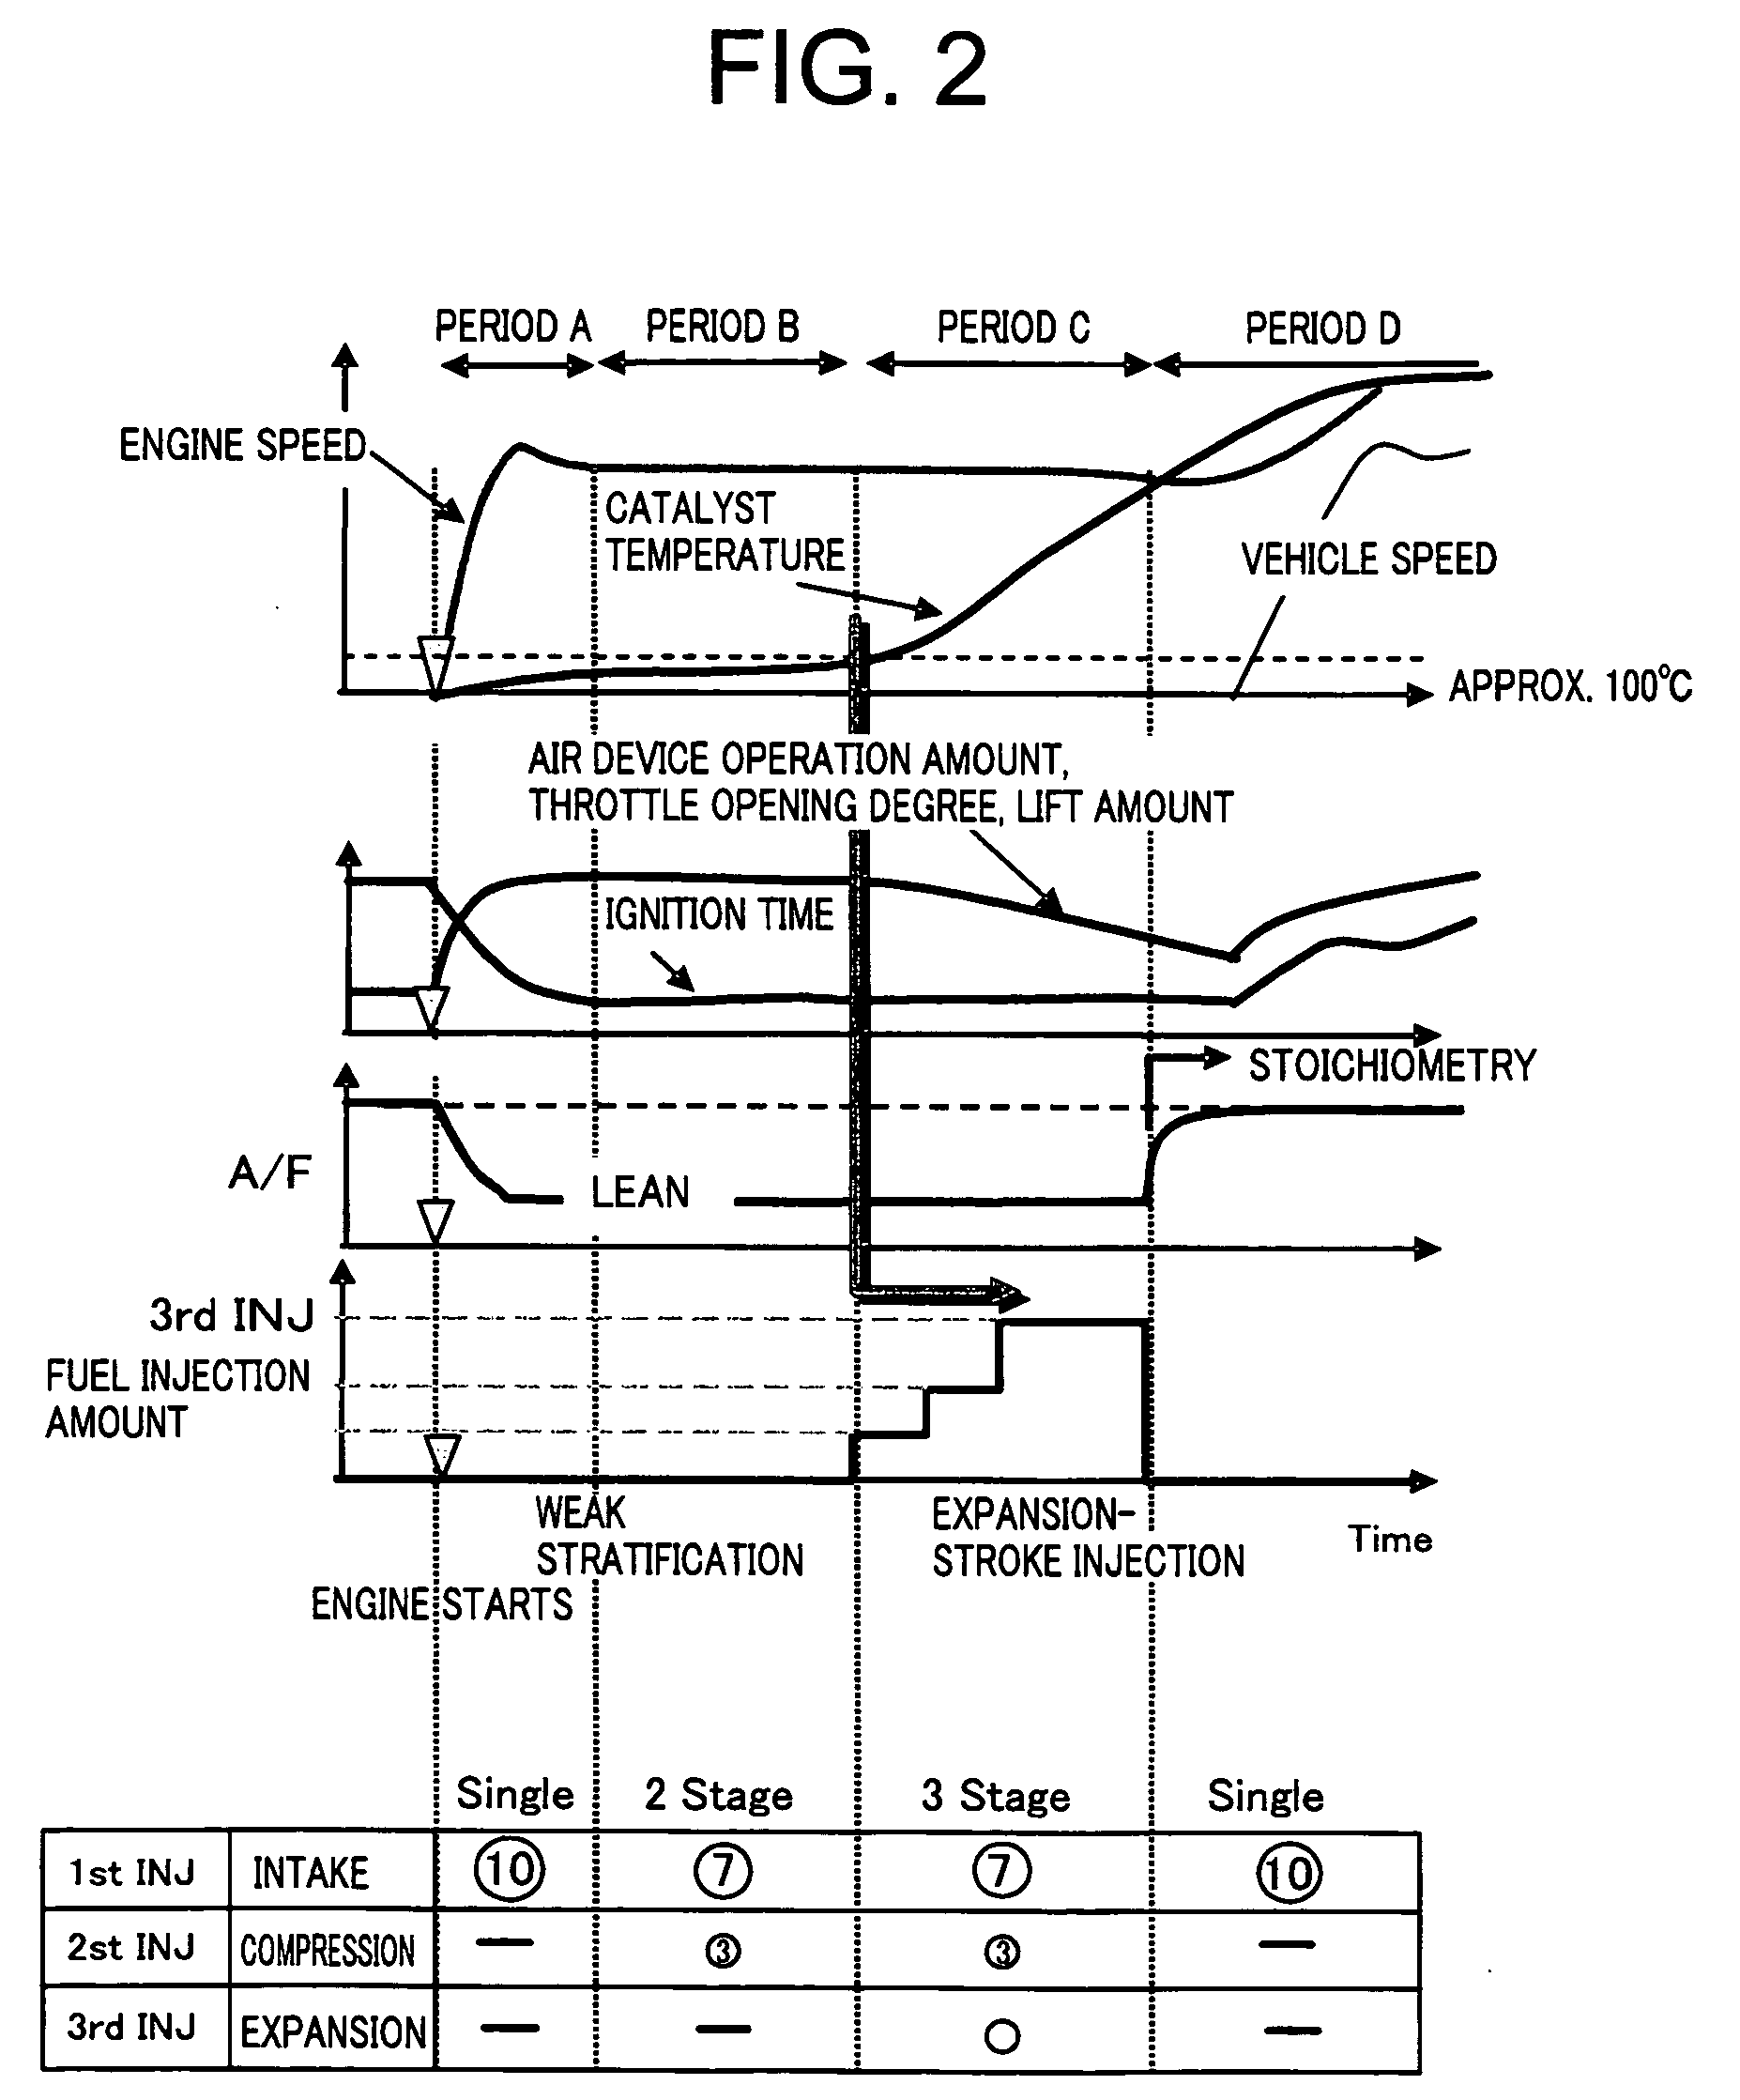 Electronic control system for controlling plant temperature